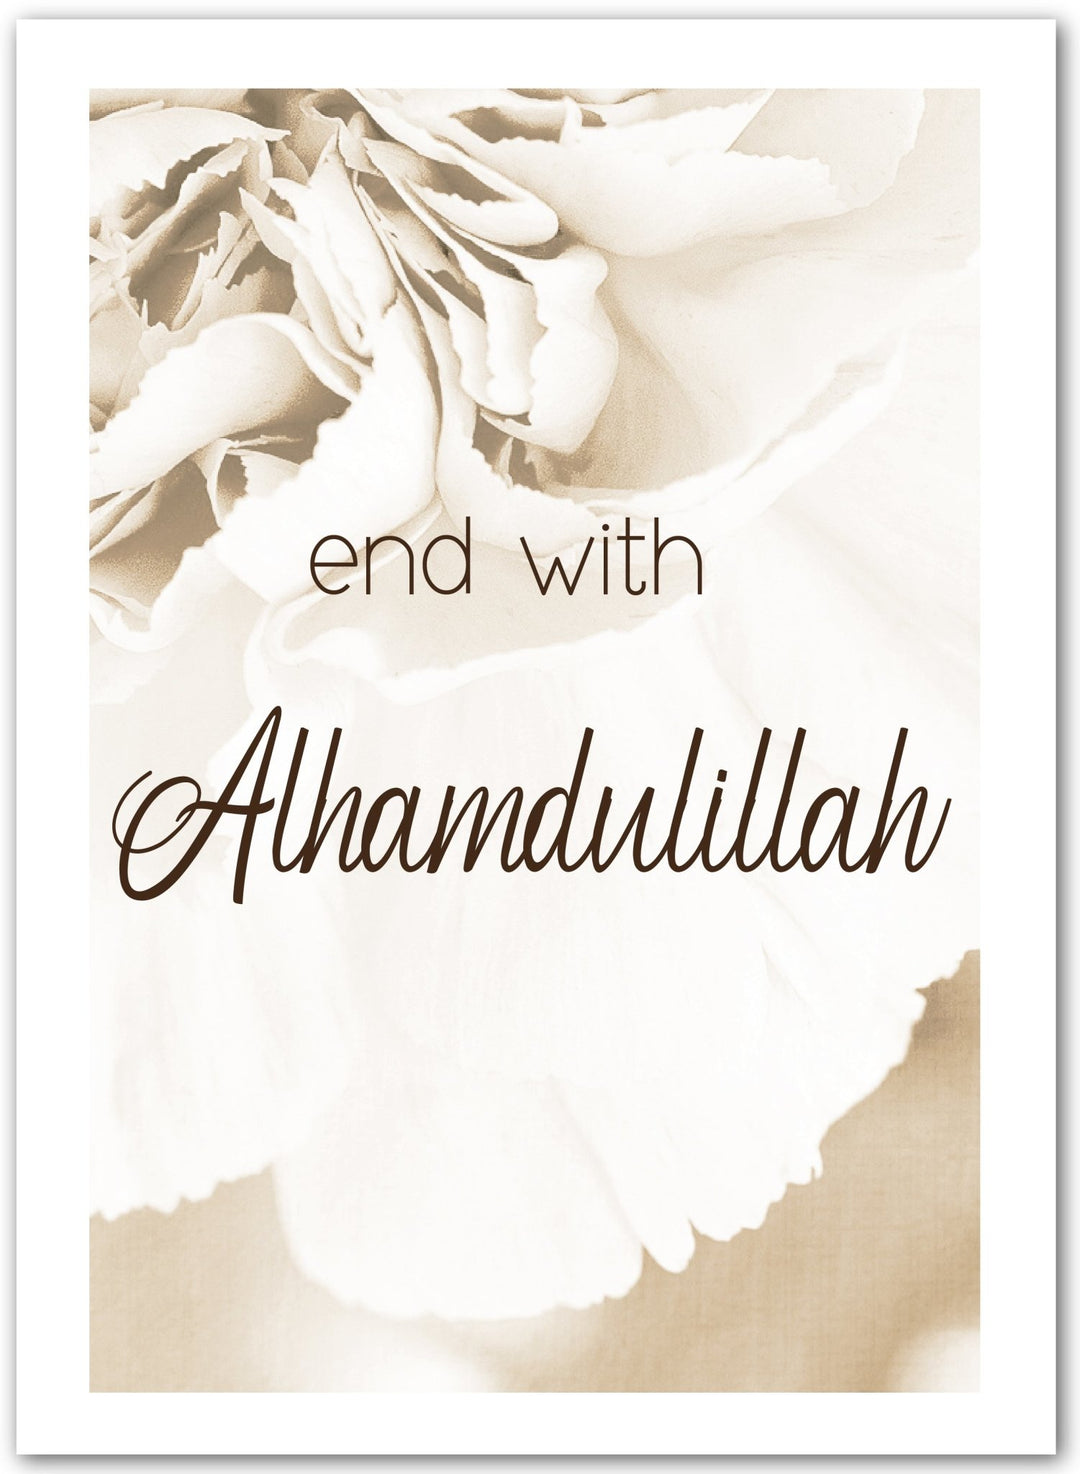 End with Alhamdulillah - rosa, weiß oder beige - Beautiful Wall